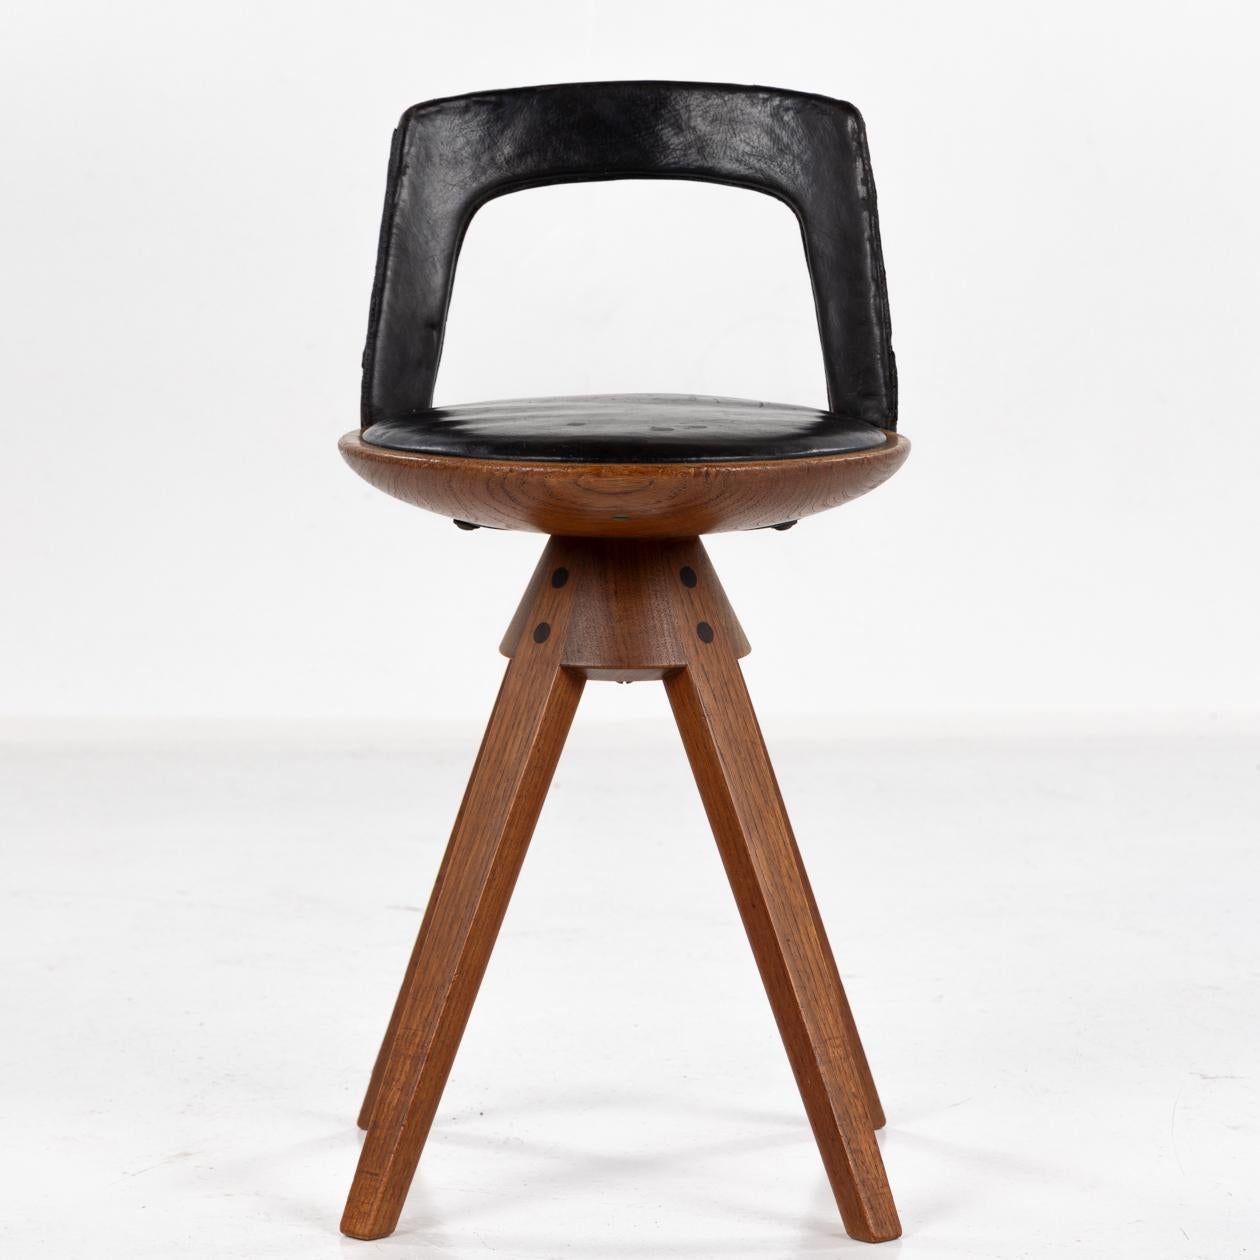 Rare swivel stool in teak and original black leather. Designed in 1957. Plaquette from manufacturer. Designed by Tove & Edvard Kindt-Larsen, made by Thorald Madsen.